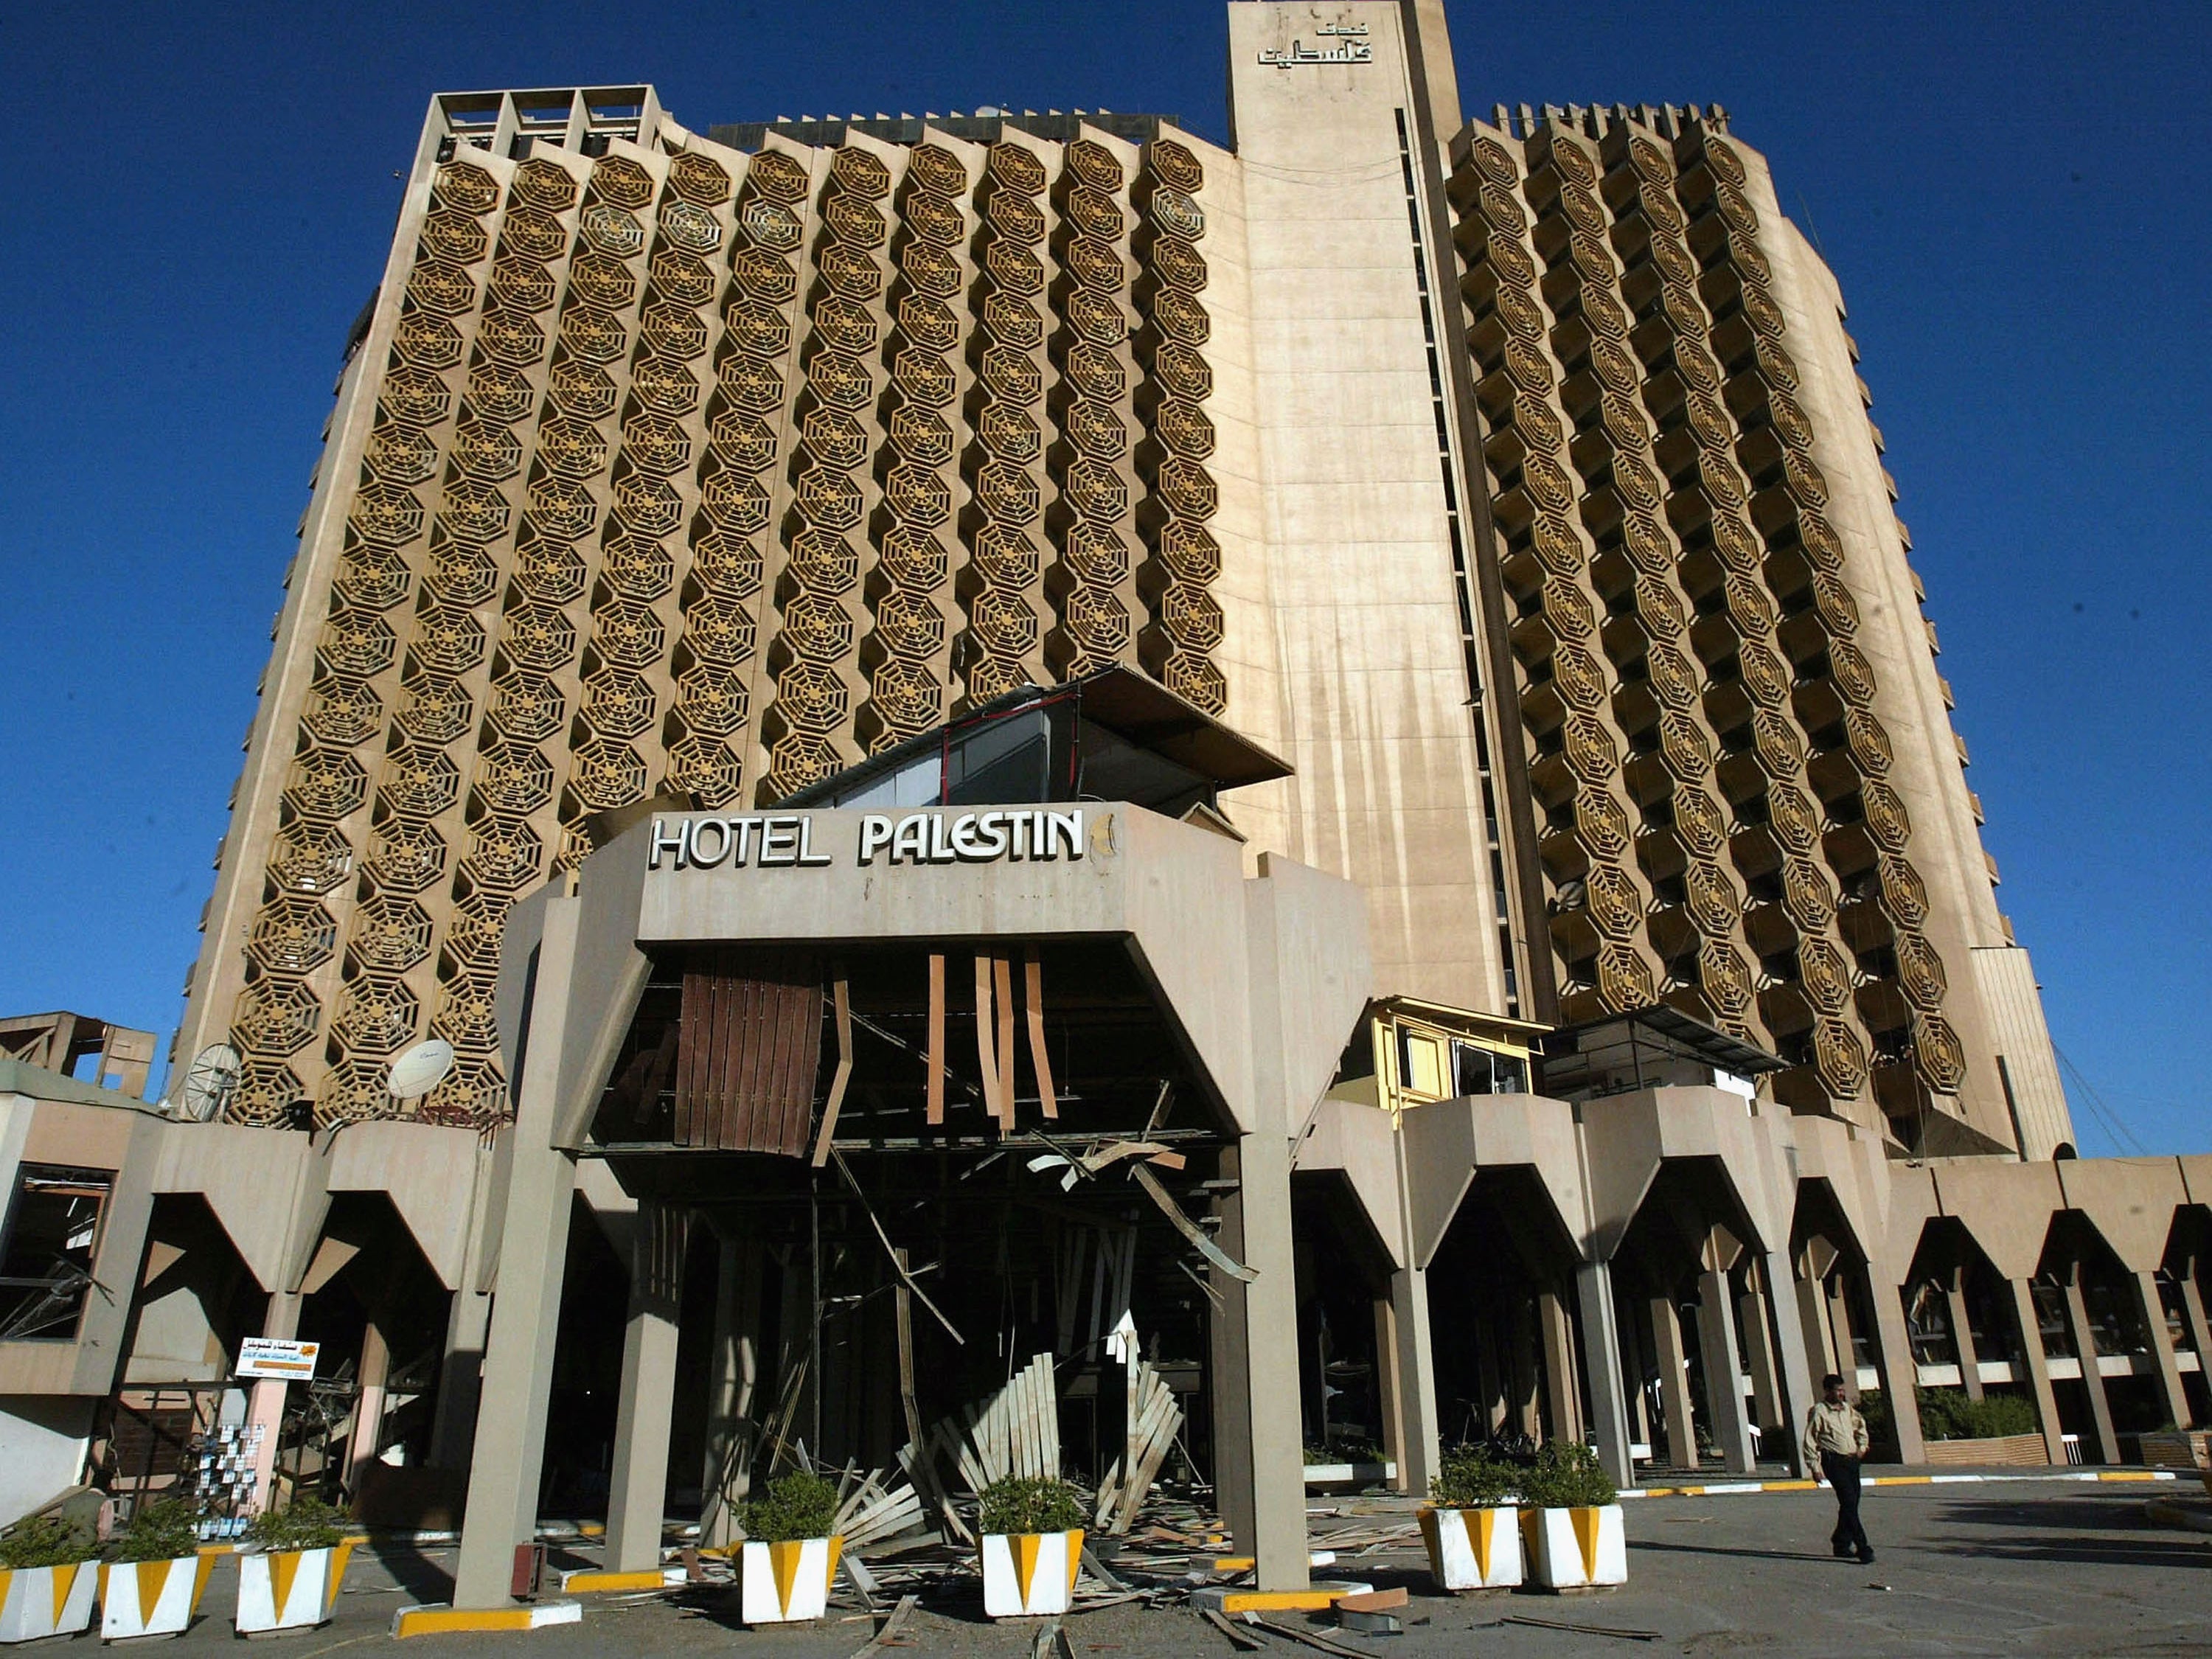 The Palestine Hotel, a base for many foreign journalists, was bombed in October 2005